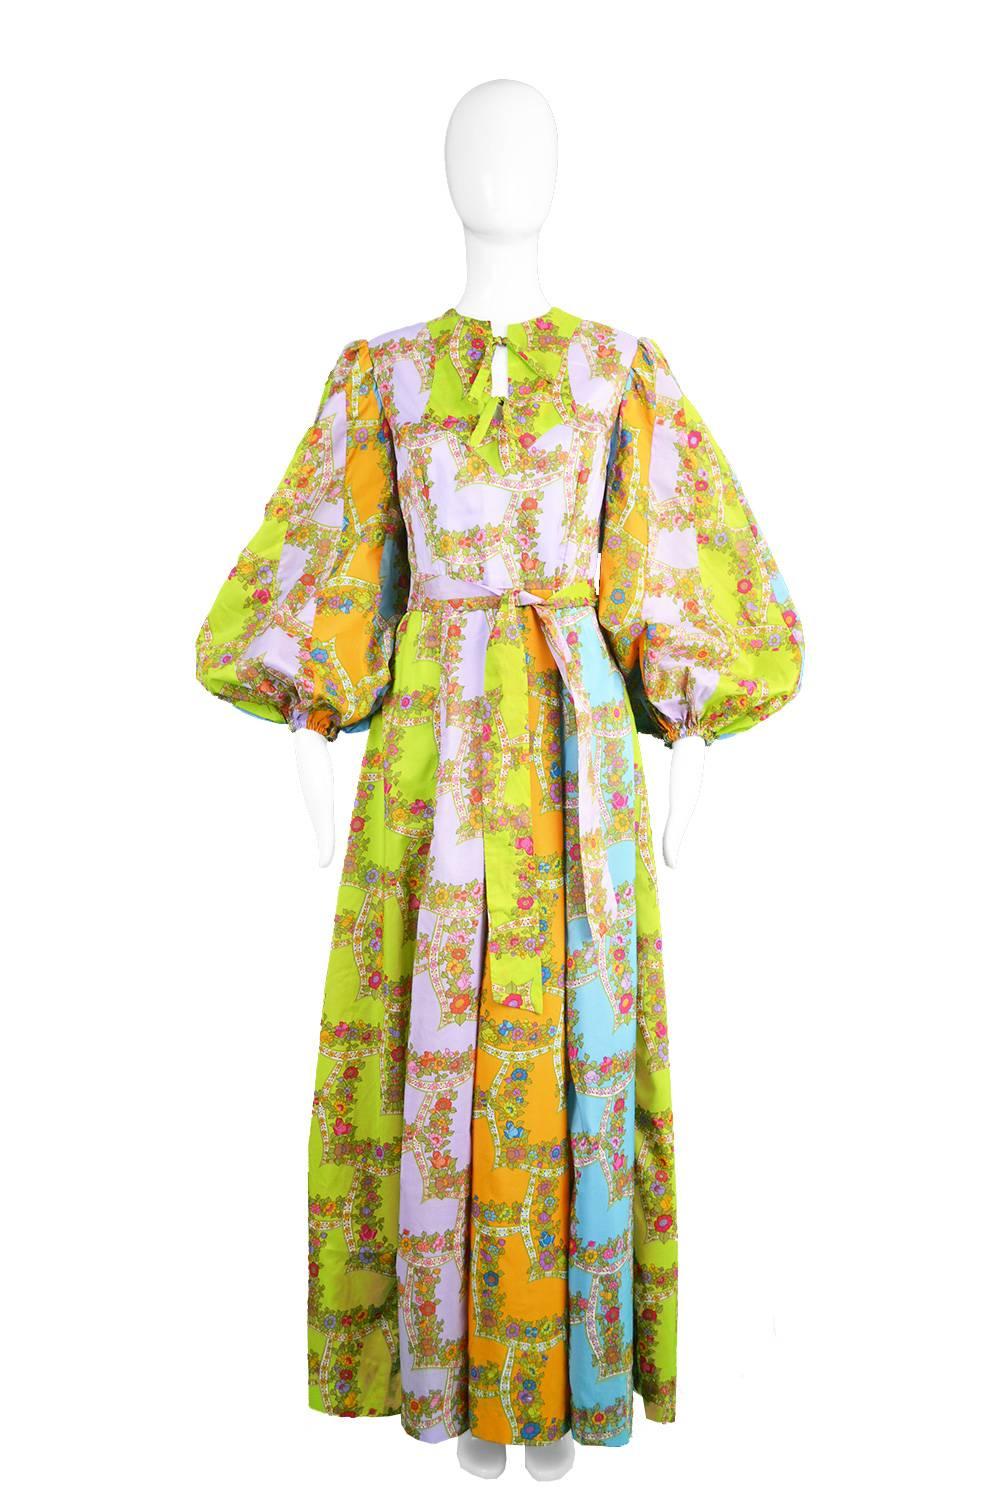 An absolutely breathtaking vintage Belinda Bellville maxi dress from the 1970s in a multicoloured, floral panelled fabric. 

Bust - 36” / 91cm
Waist - 28” / 71cm
Hips - Up to 46” / 117cm
Length (Shoulder to Hem) - 58” / 148cm
Shoulder to